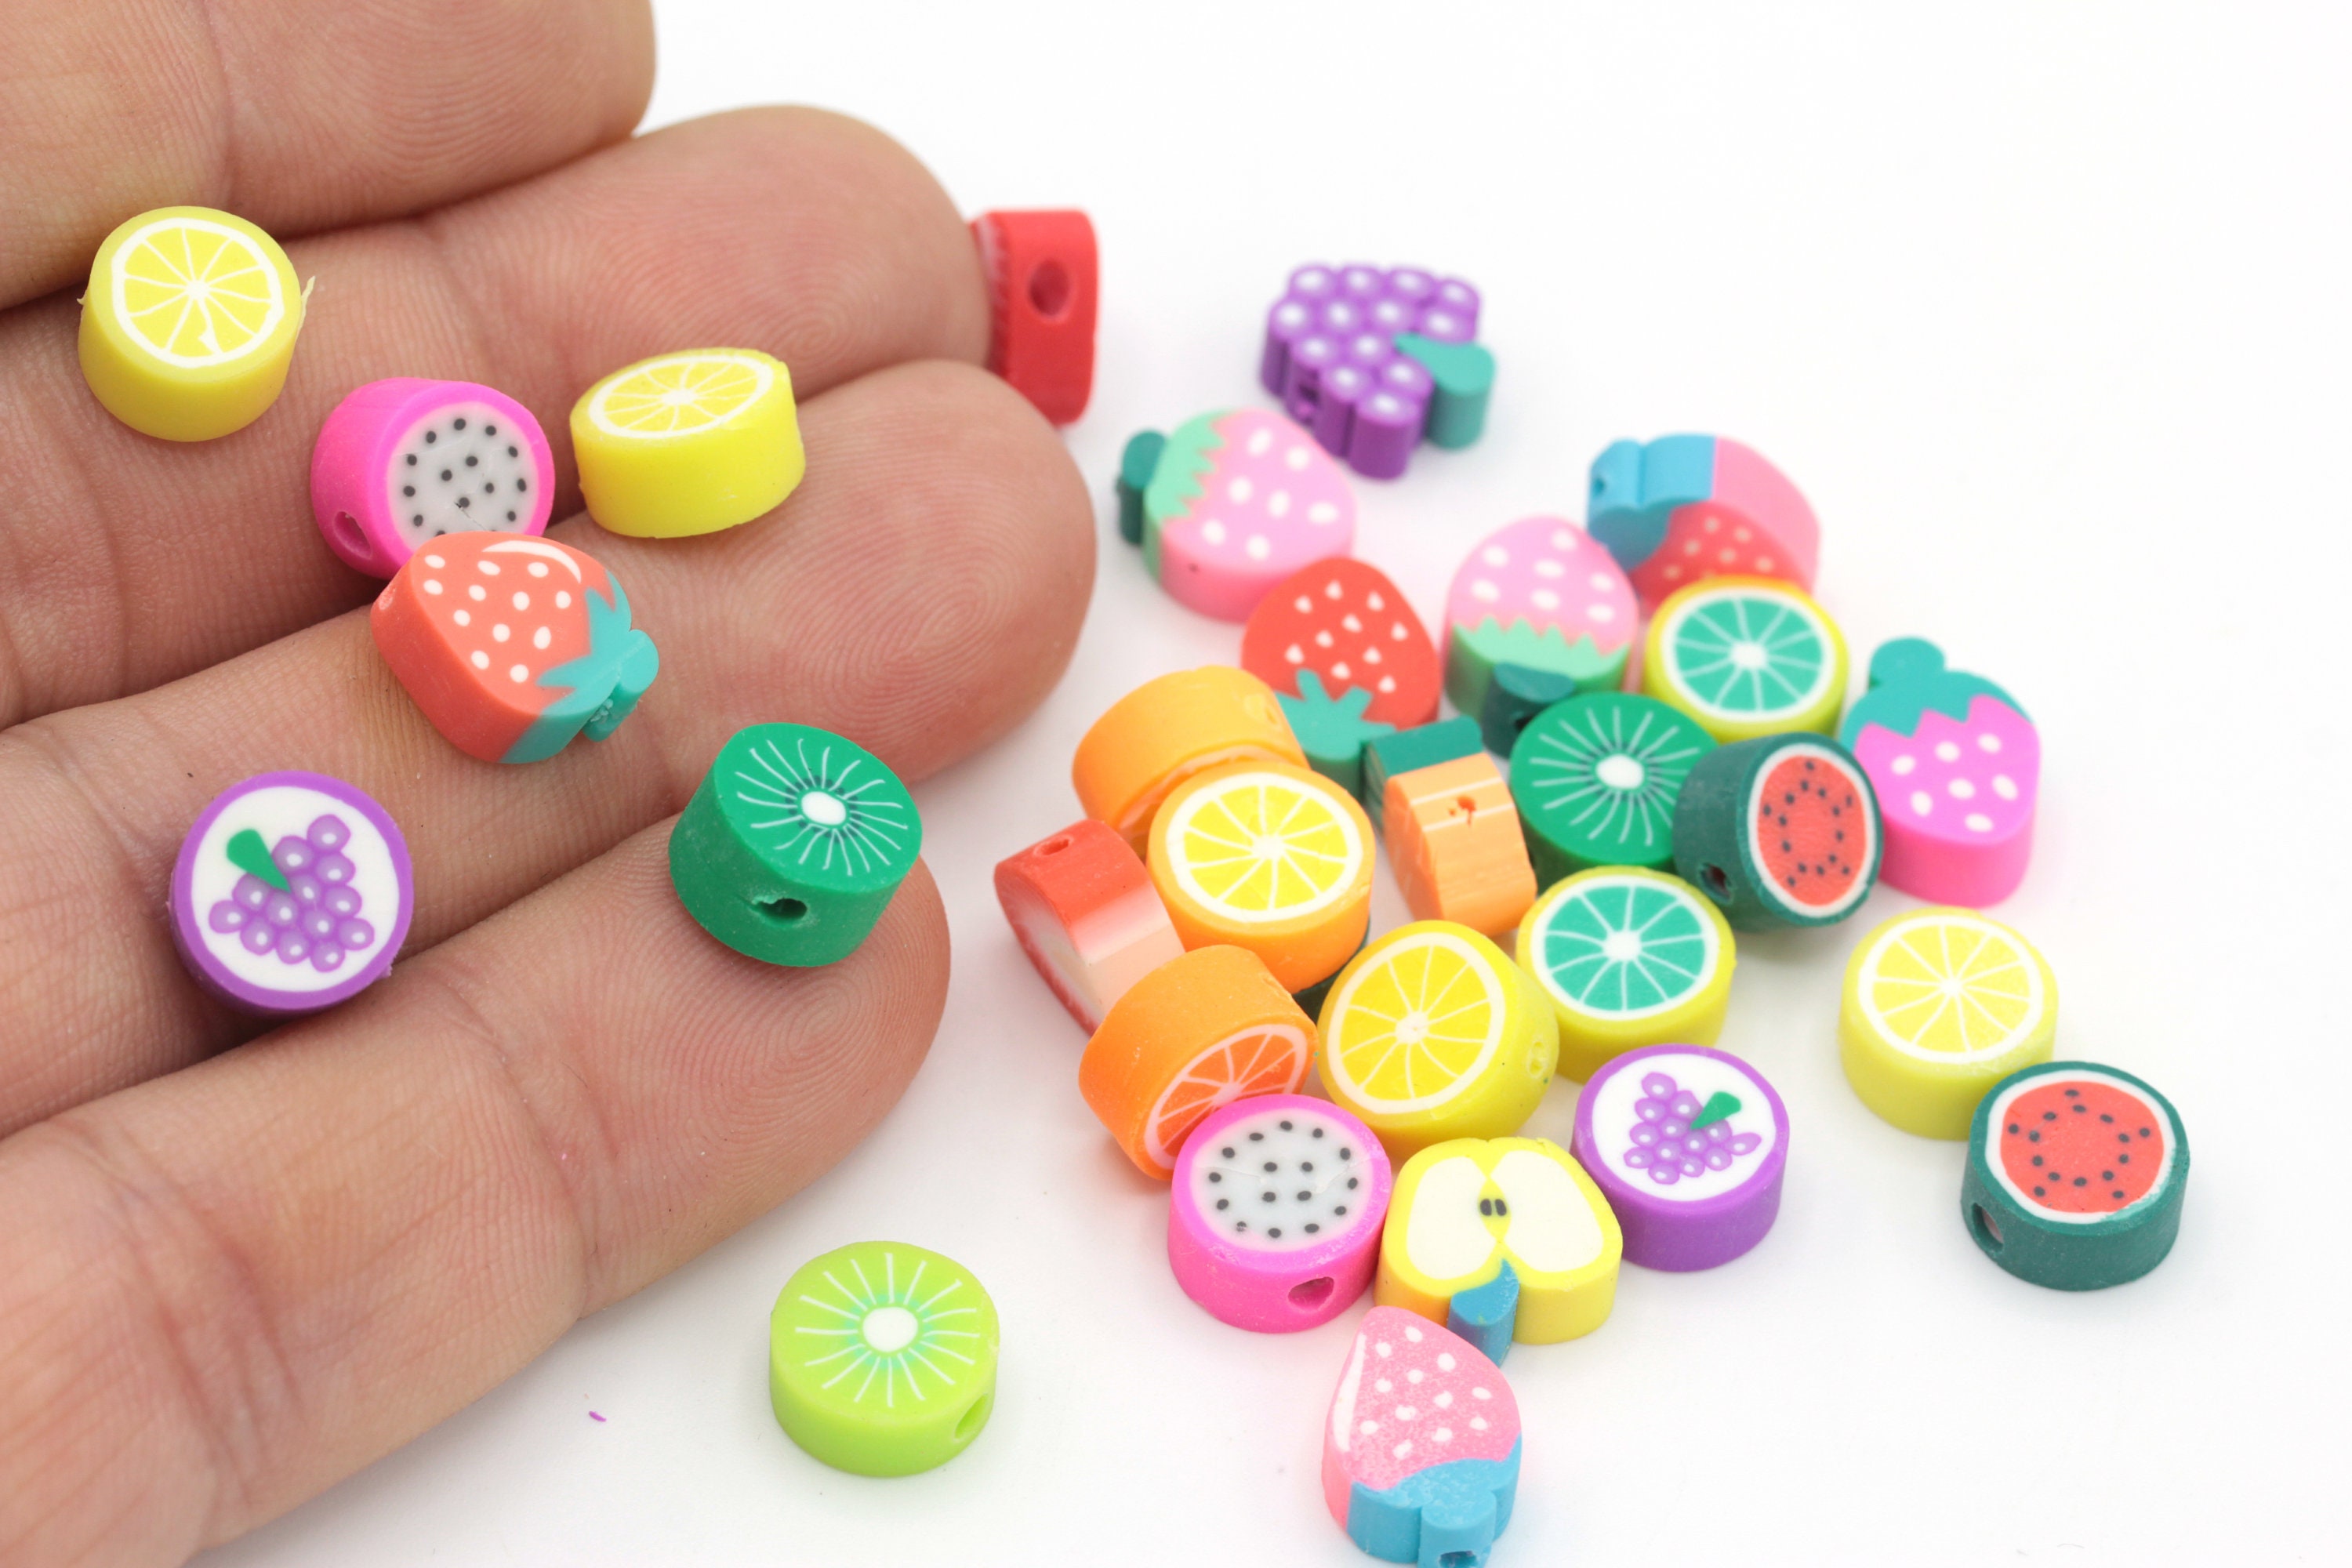 Small Fruit shape beads,colorful fruits beads,fruit Polymer Clay Beads  rubber cute Kawaii bead for bracelet necklace phone strap charm BB170